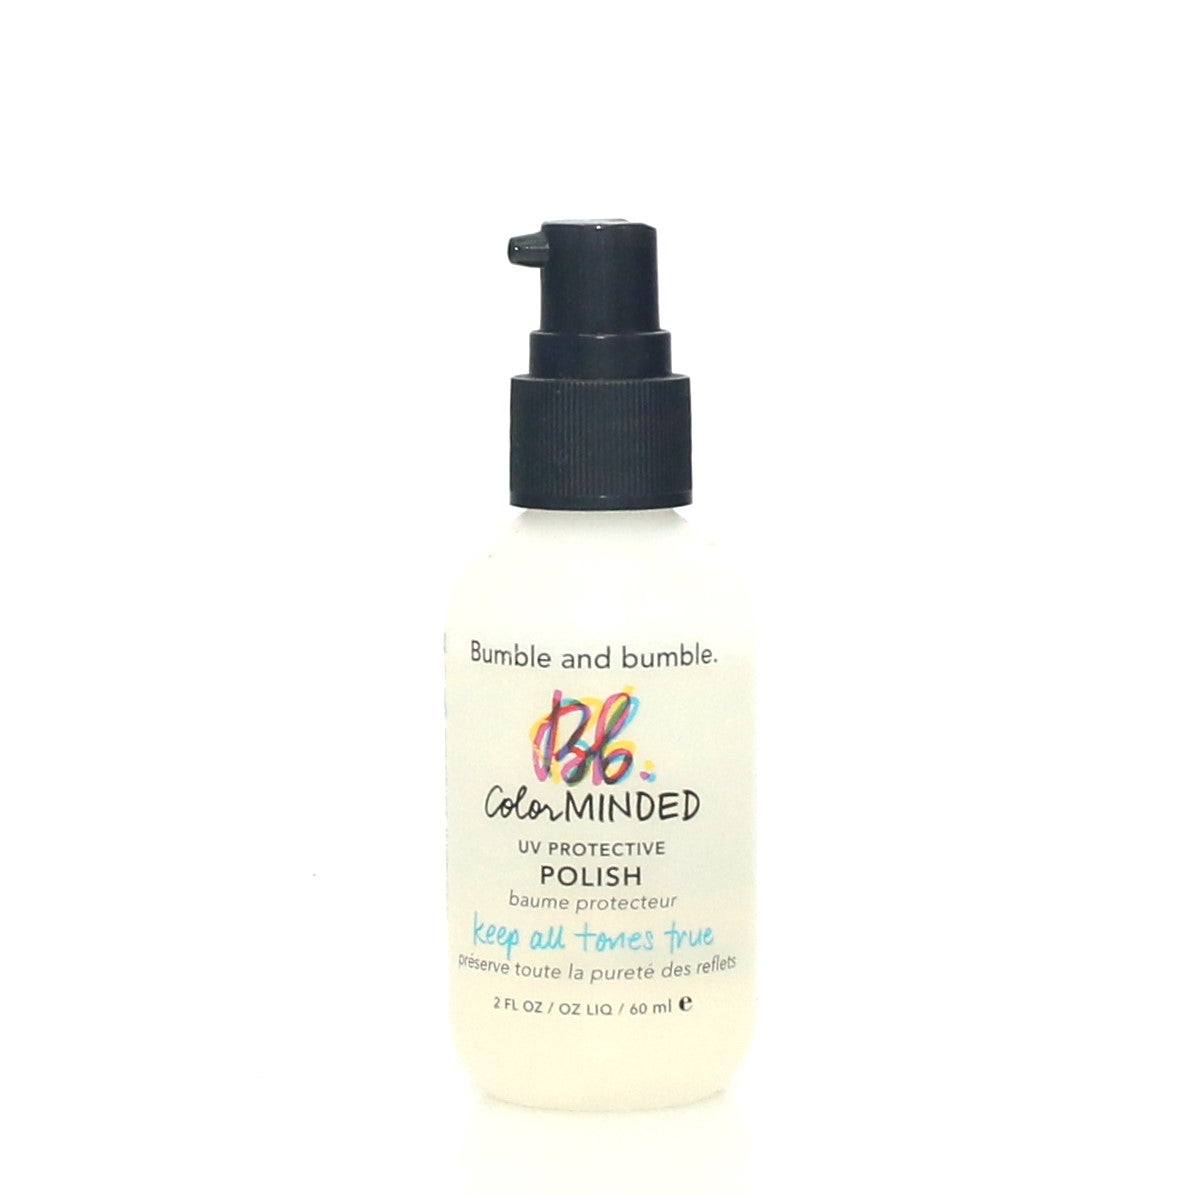 Bumble and bumble Color Minded UV Protective Polish 2 oz